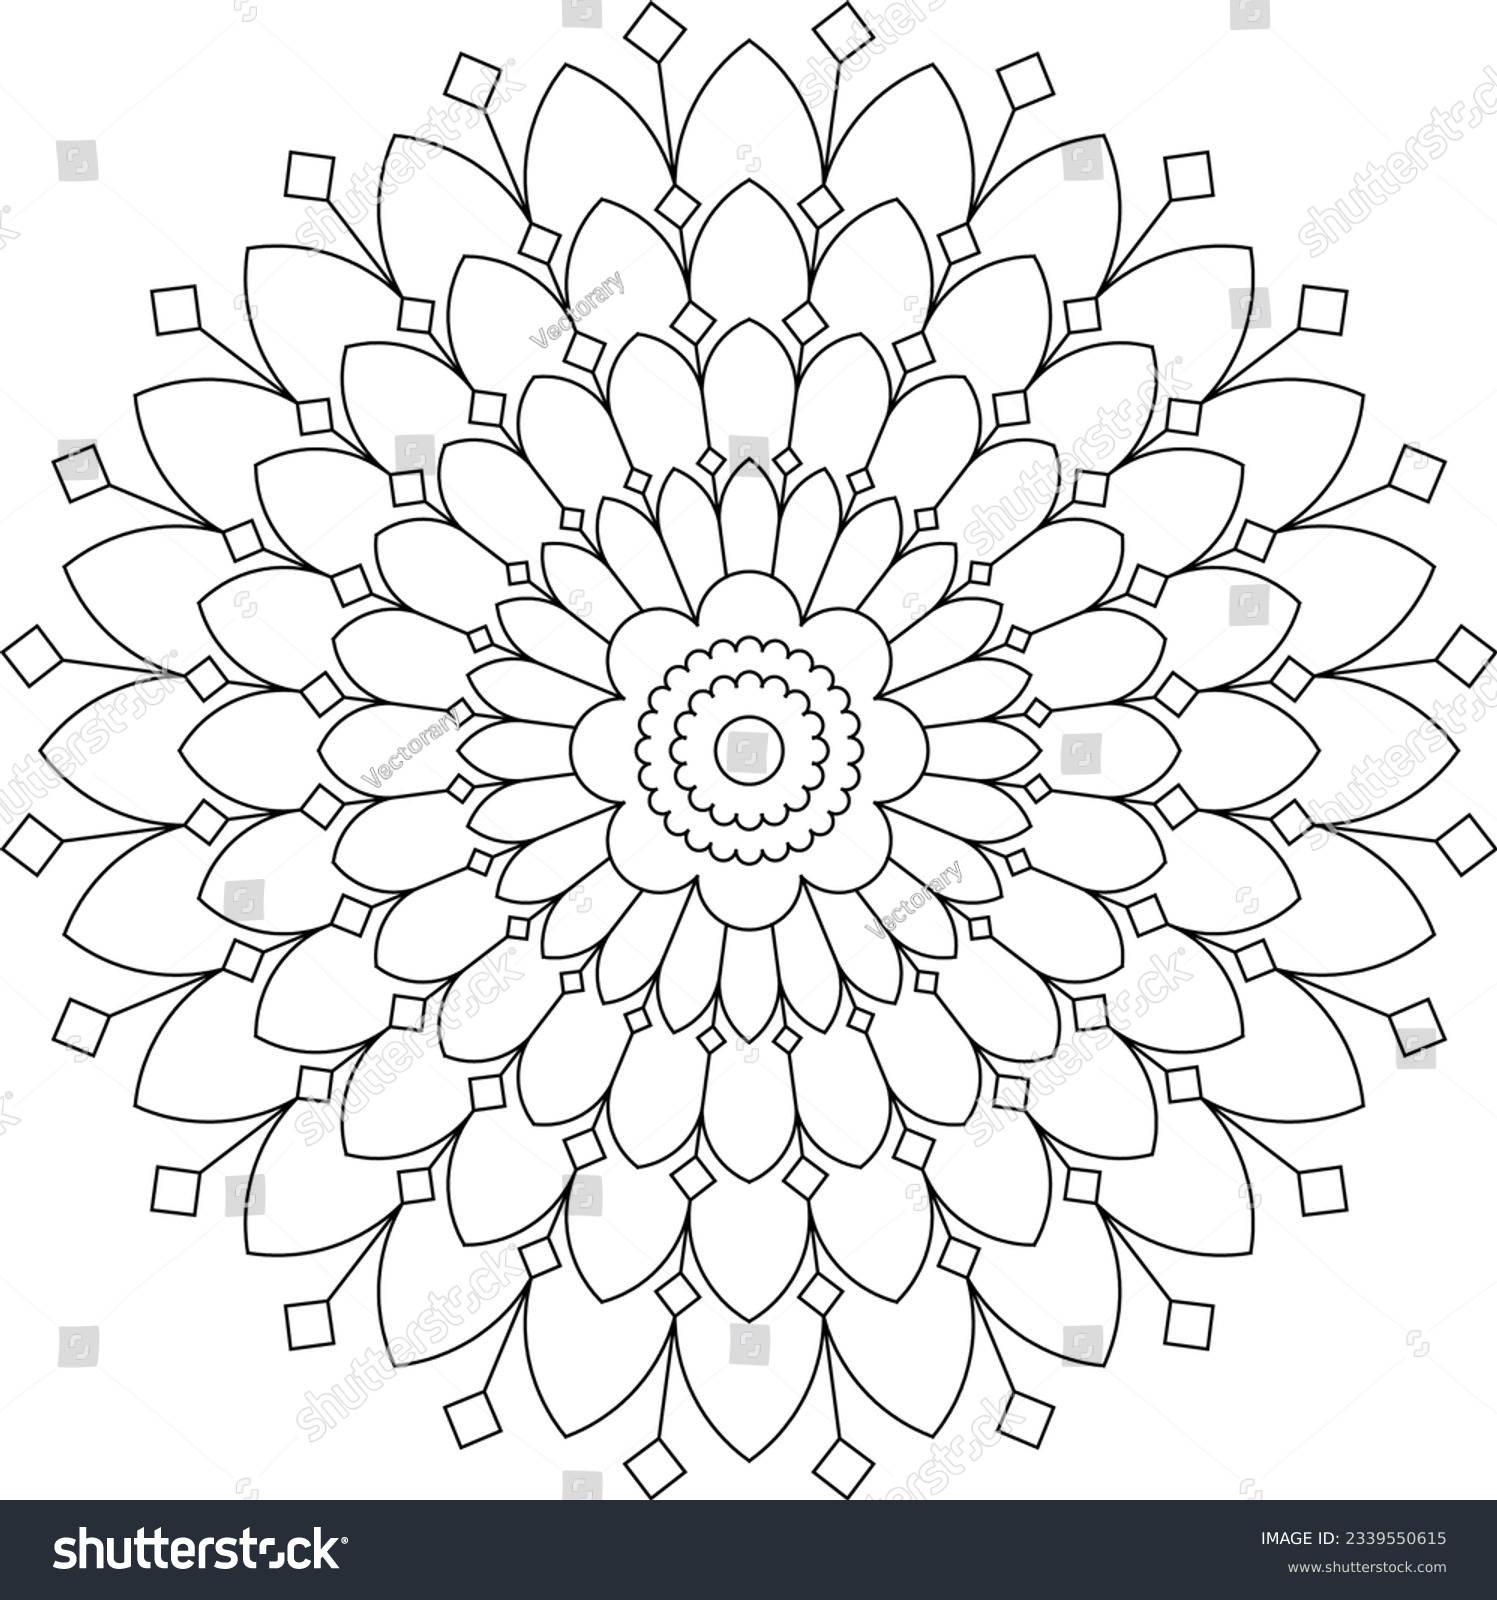 Adult coloring simple images stock photos d objects vectors